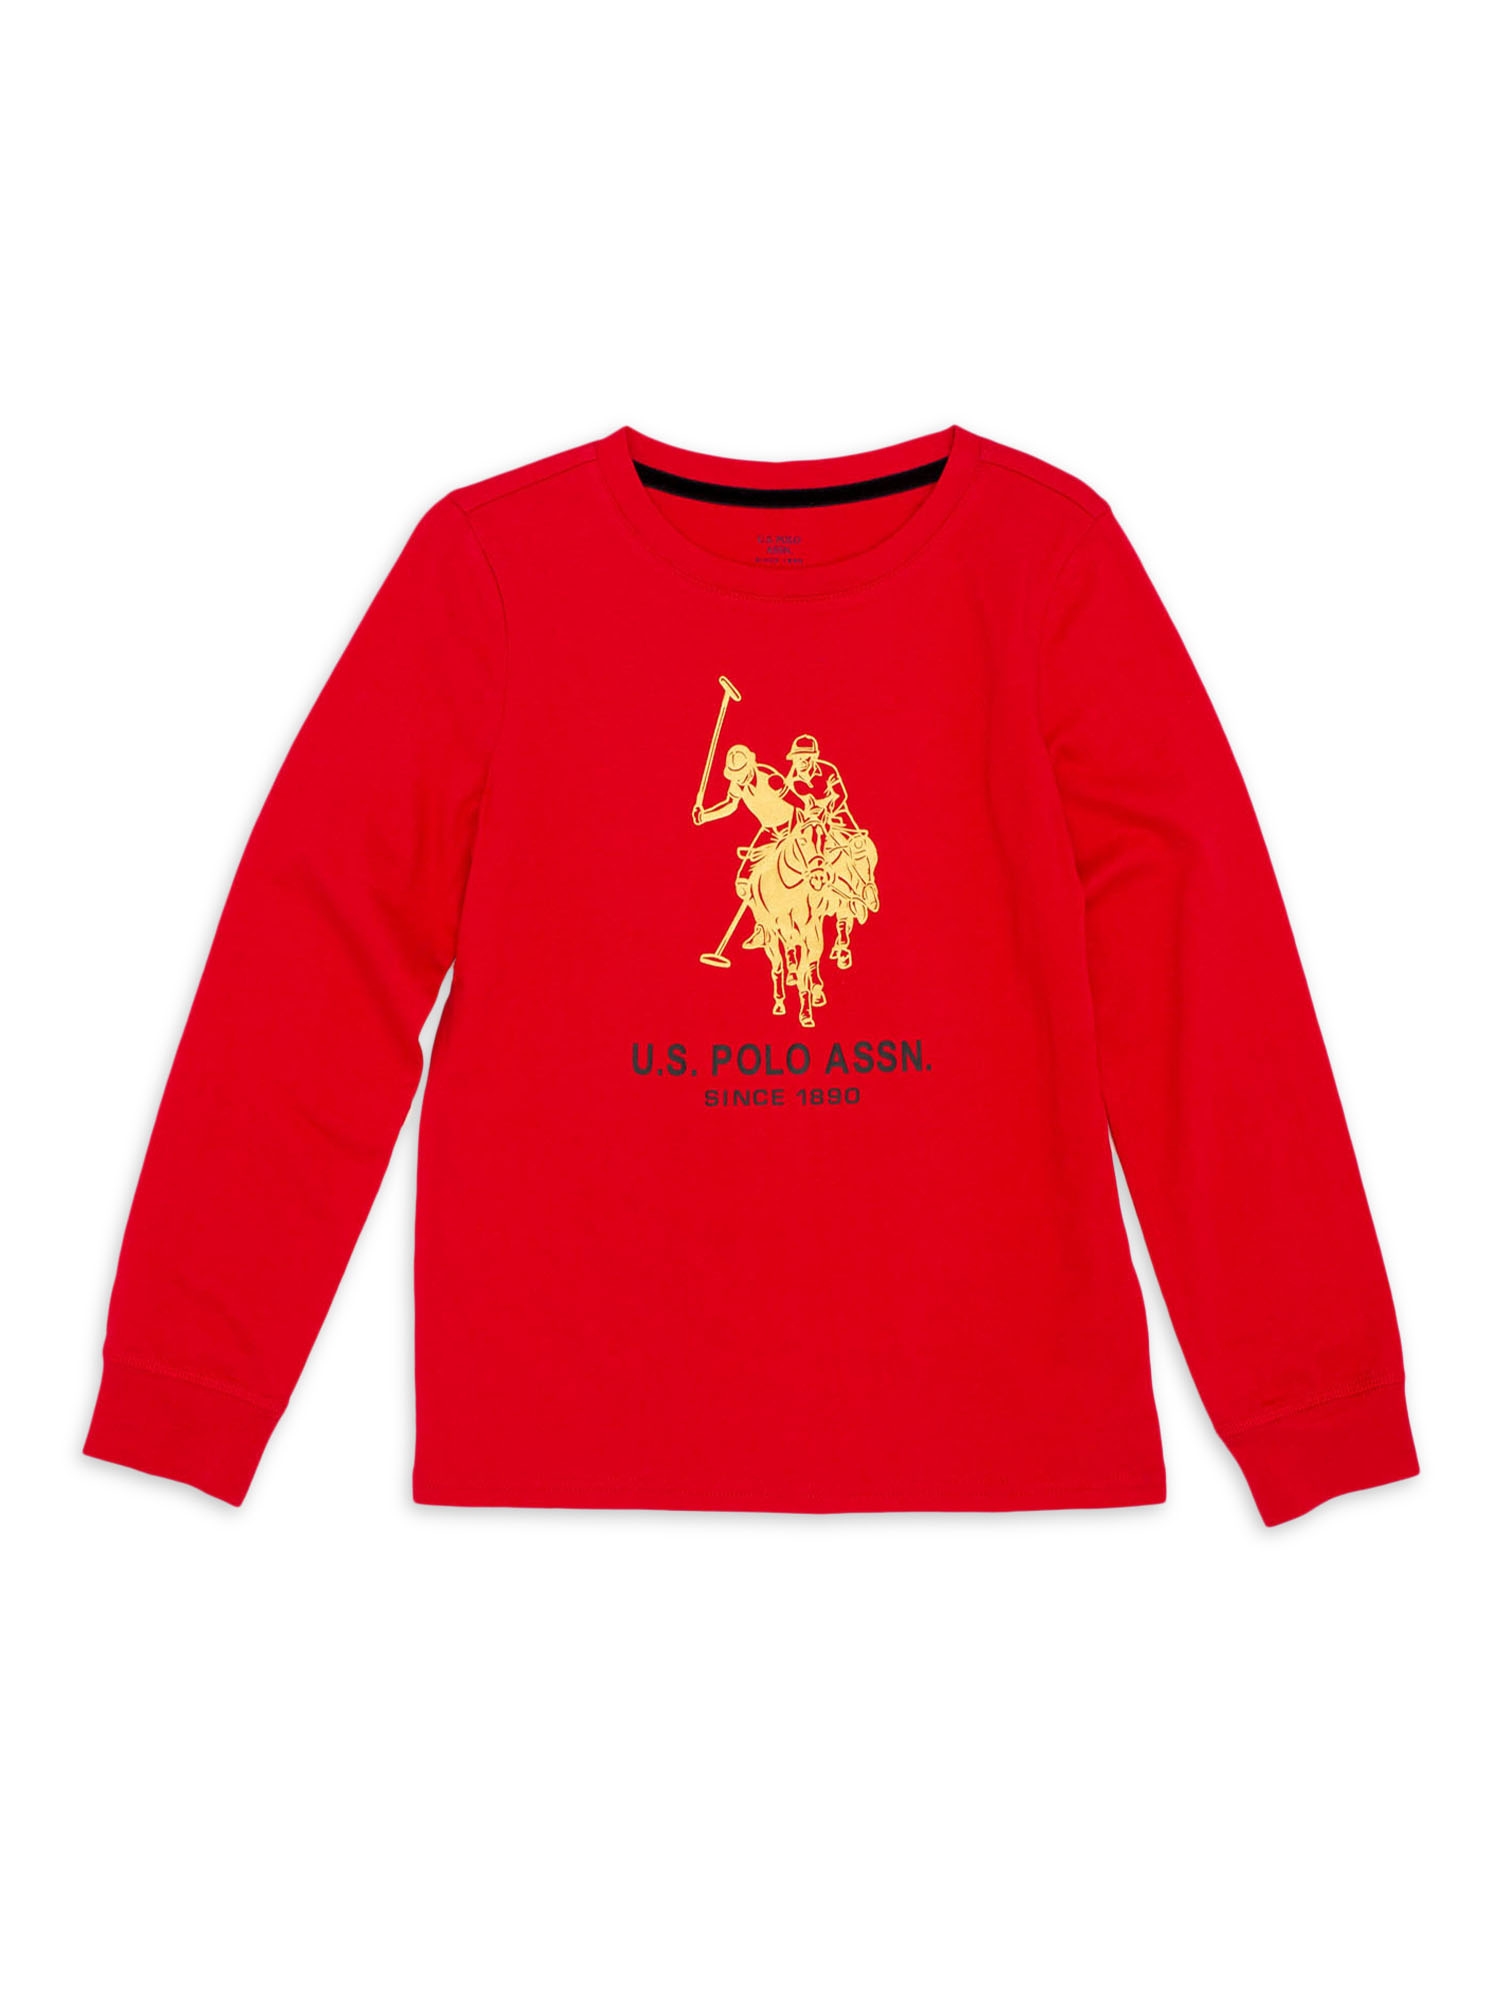 U.S. Polo Assn. Girls Apres Ski Family Dressing Graphic Long Sleeve Graphic T-Shirt, Sizes 4-18 - image 1 of 2